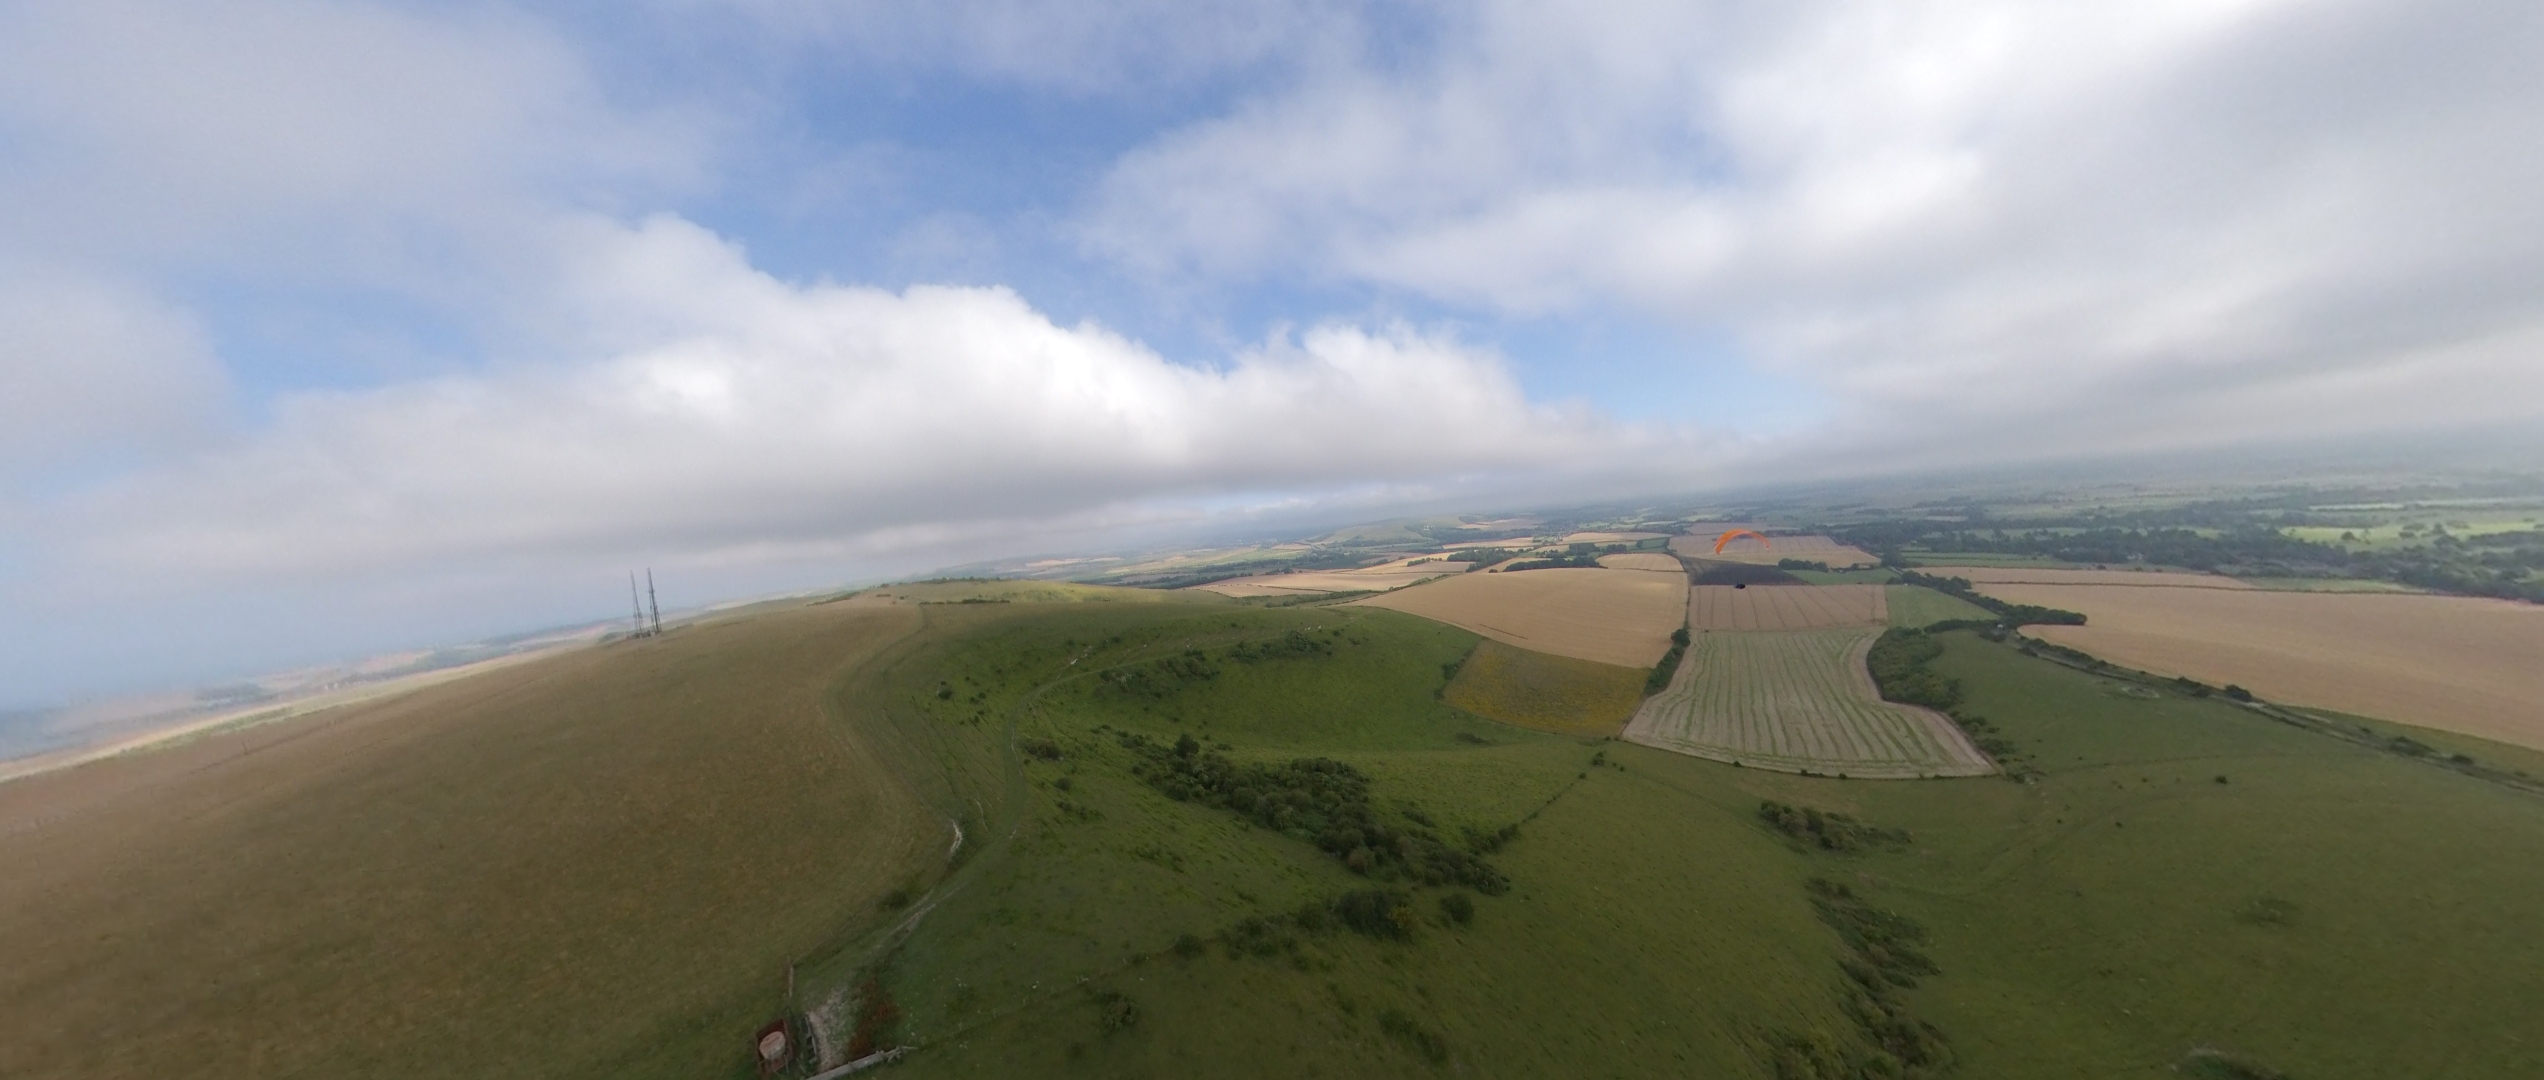 Sussex countryside and South Downs paragliding gift idea from london